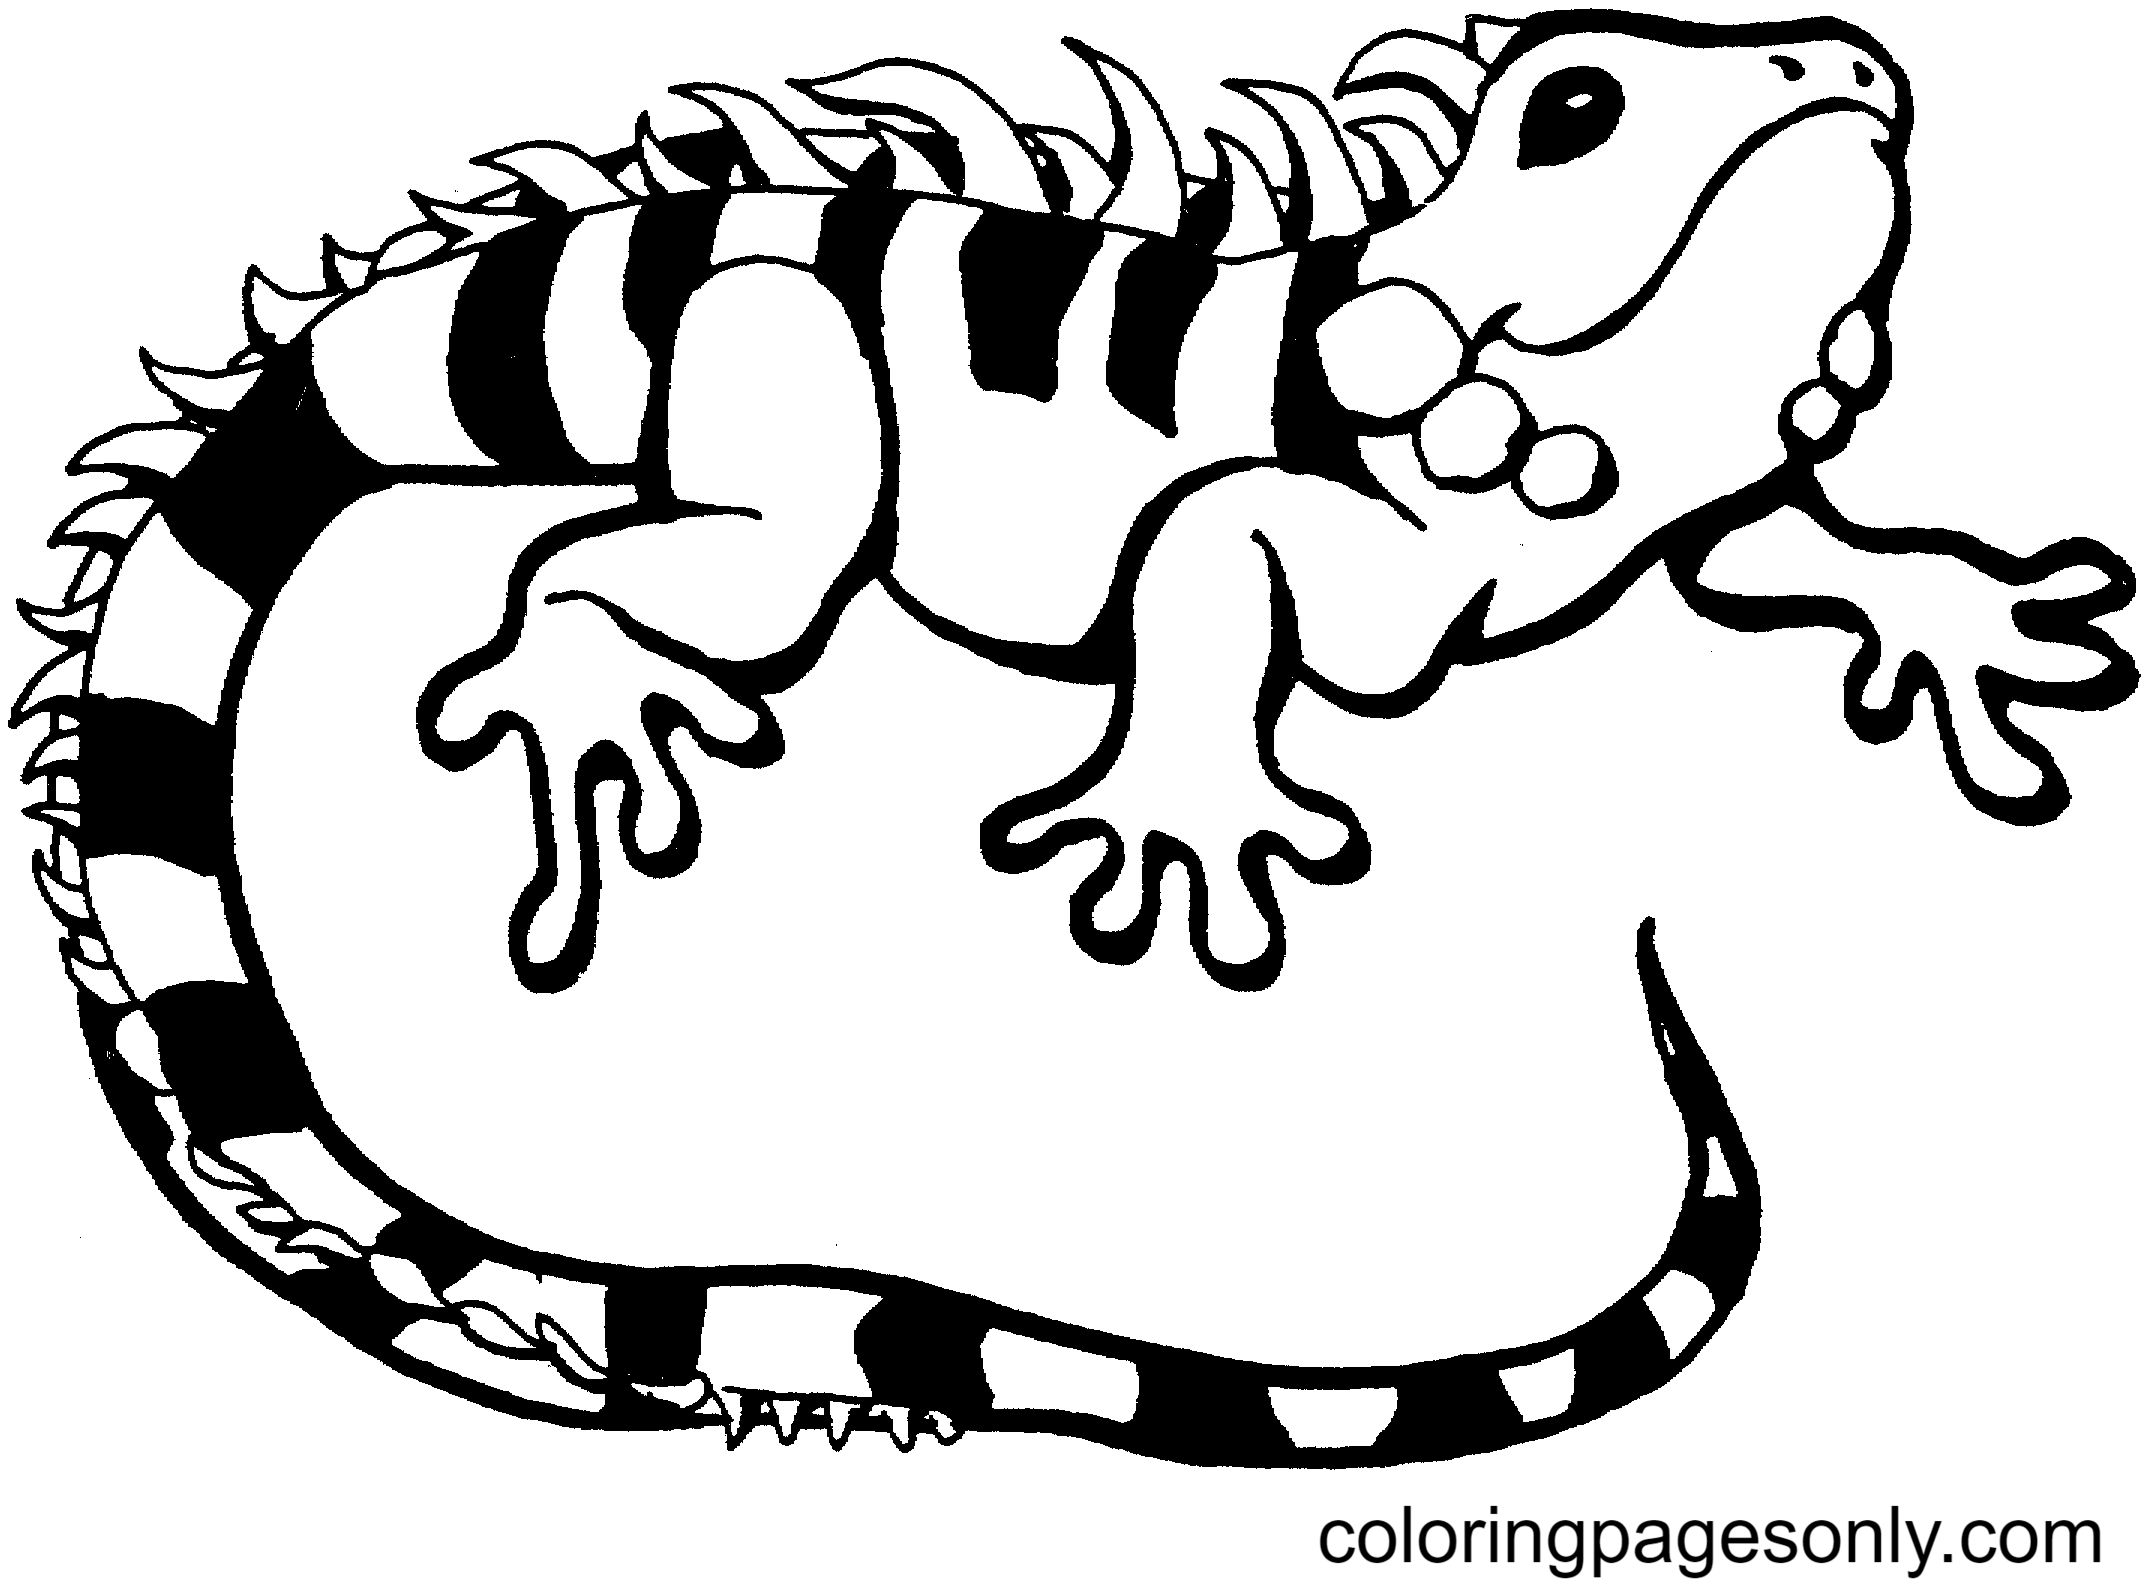 Free Lizard Coloring Page - Free Printable Coloring Pages